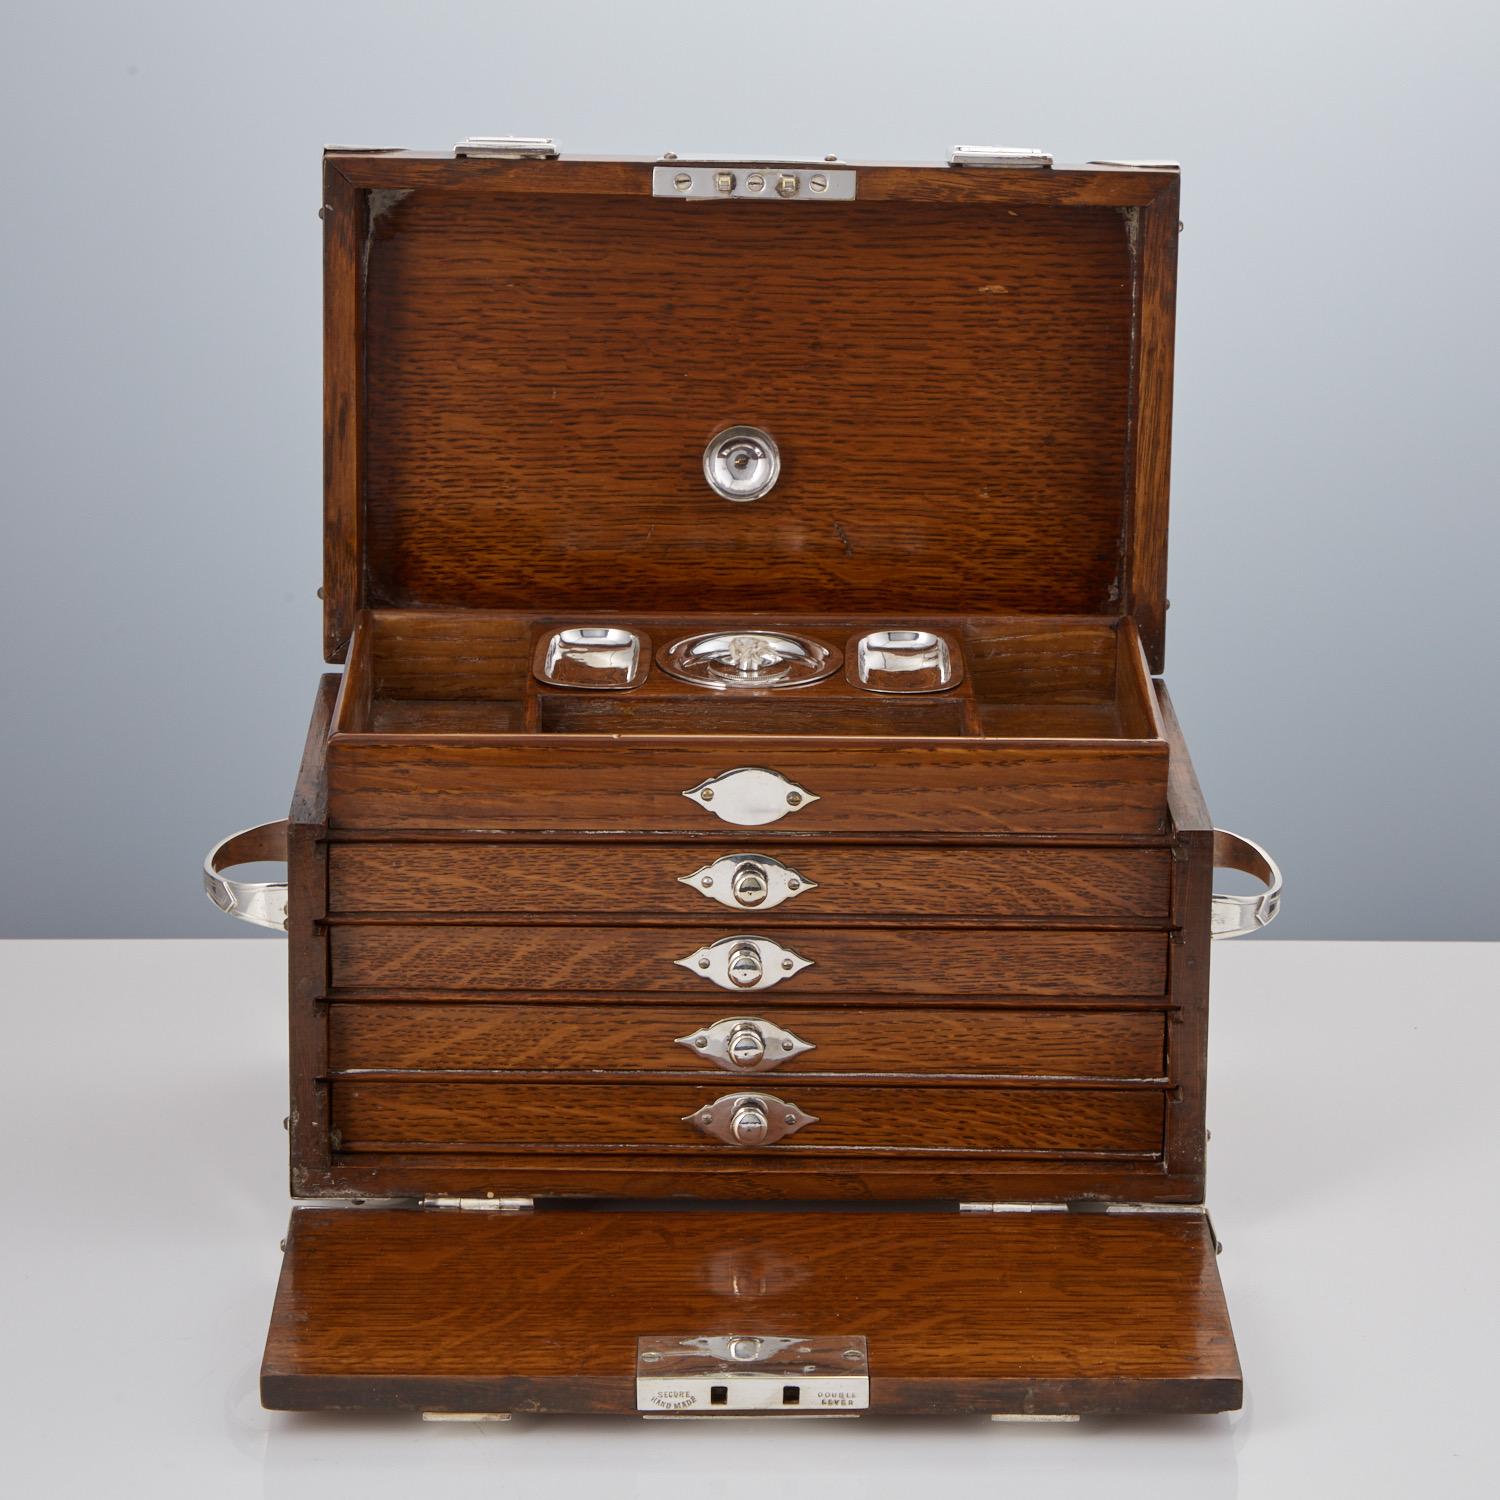 This beautiful english oak box is extremely well made and enhanced by the strap & buckle features which also applies to the carrying handles.
On lifting the lid it reveals a central cigar lighter with two small trays either side for matches, there